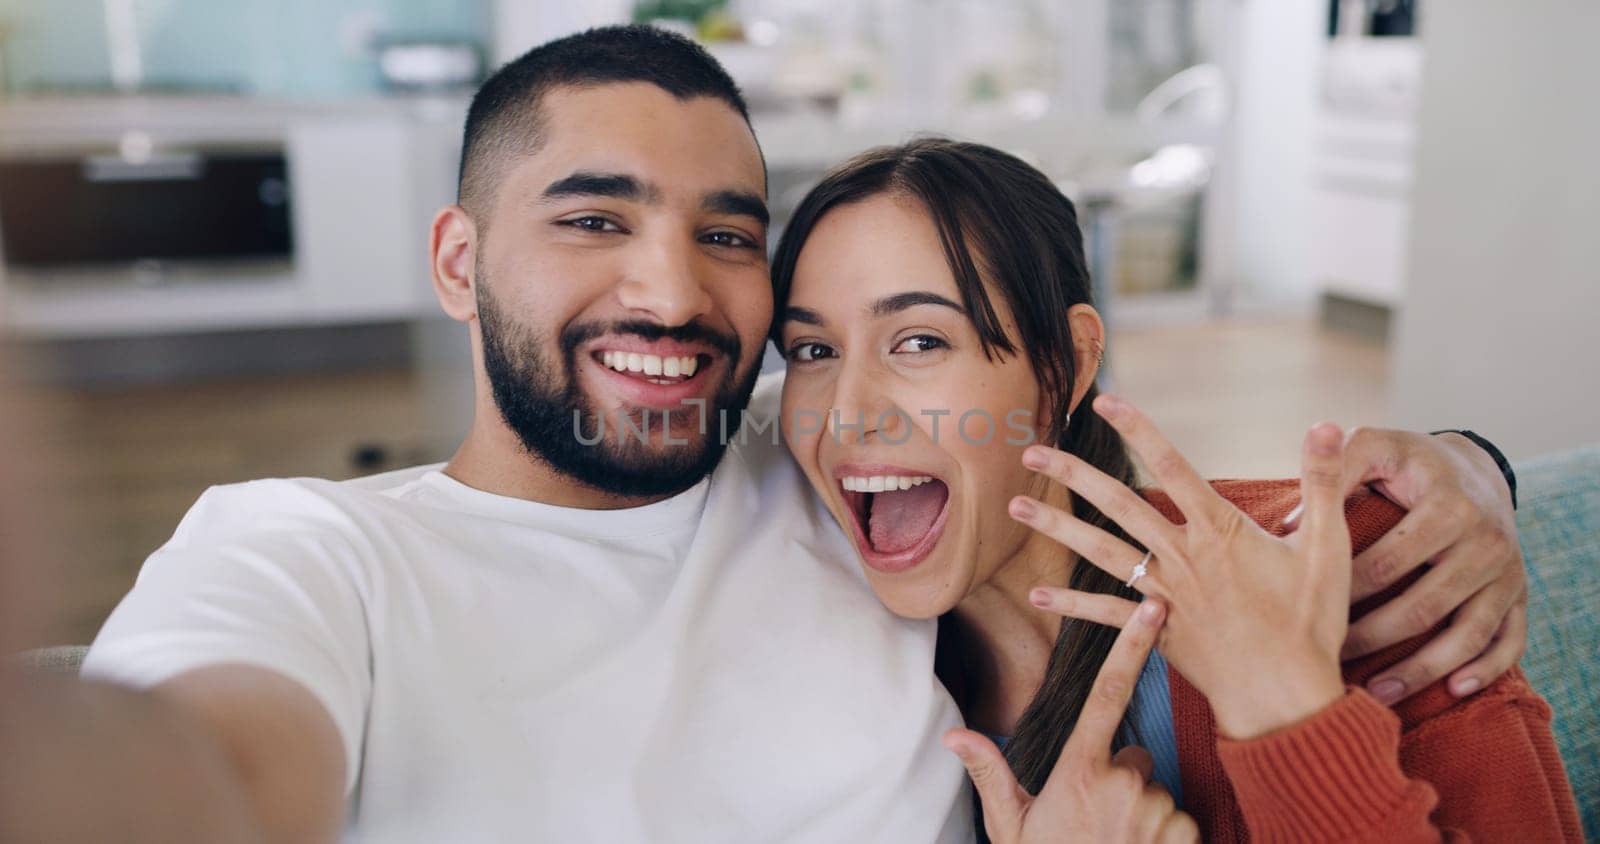 Couple, selfie and engagement ring in home portrait with happiness, romance and love on social media app. Man, woman and profile picture for marriage proposal, offer or celebration with smile on blog by YuriArcurs